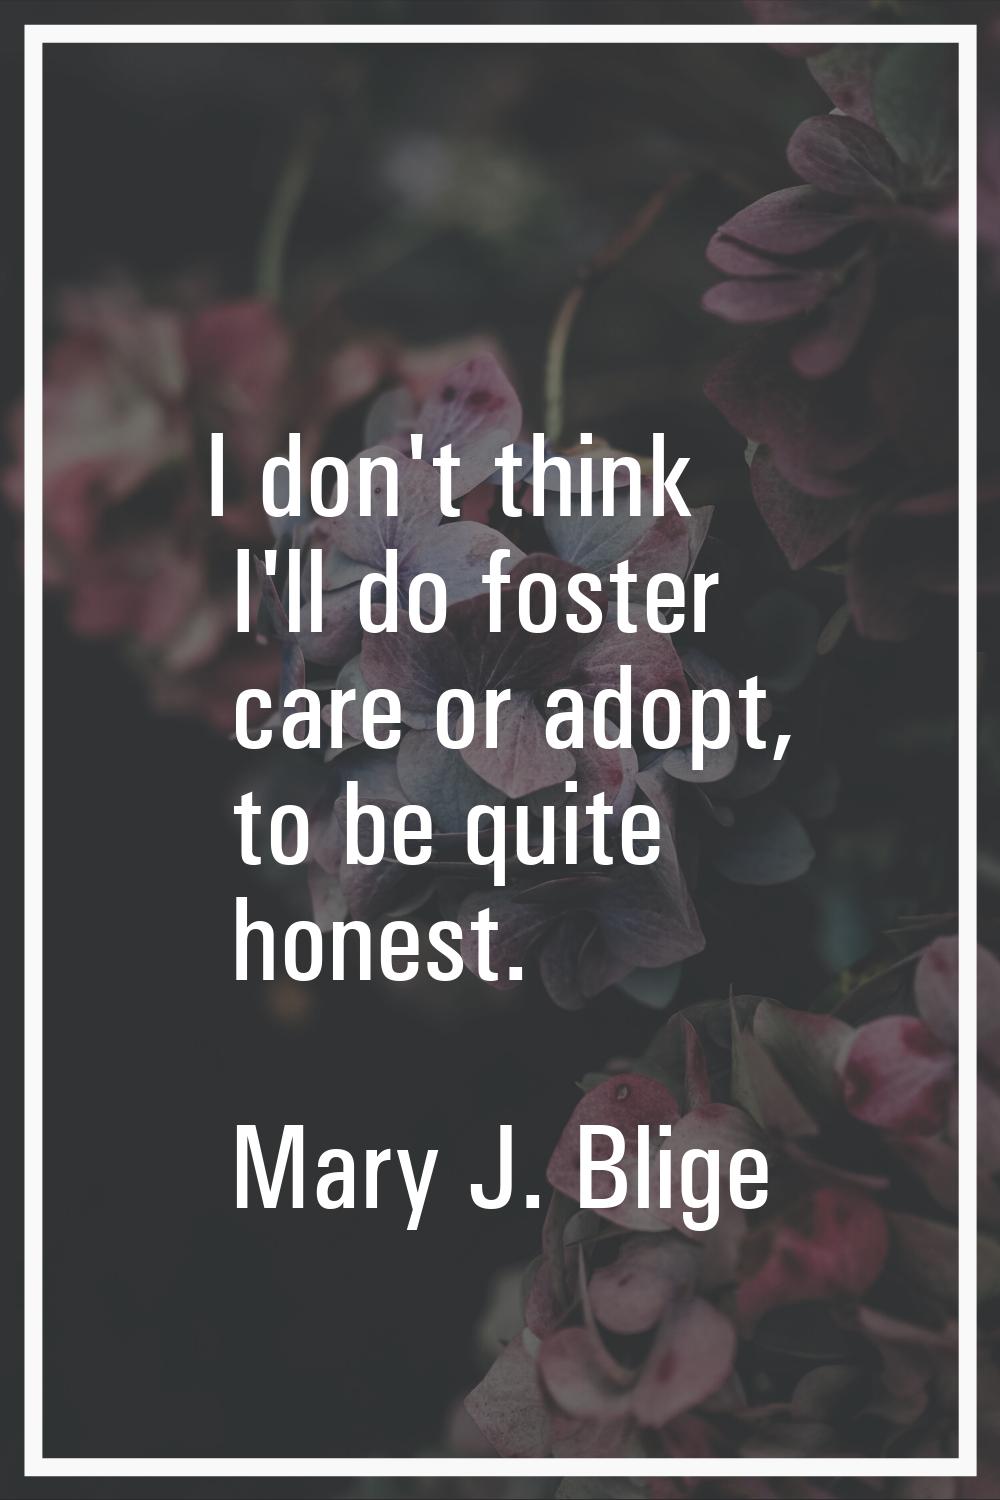 I don't think I'll do foster care or adopt, to be quite honest.